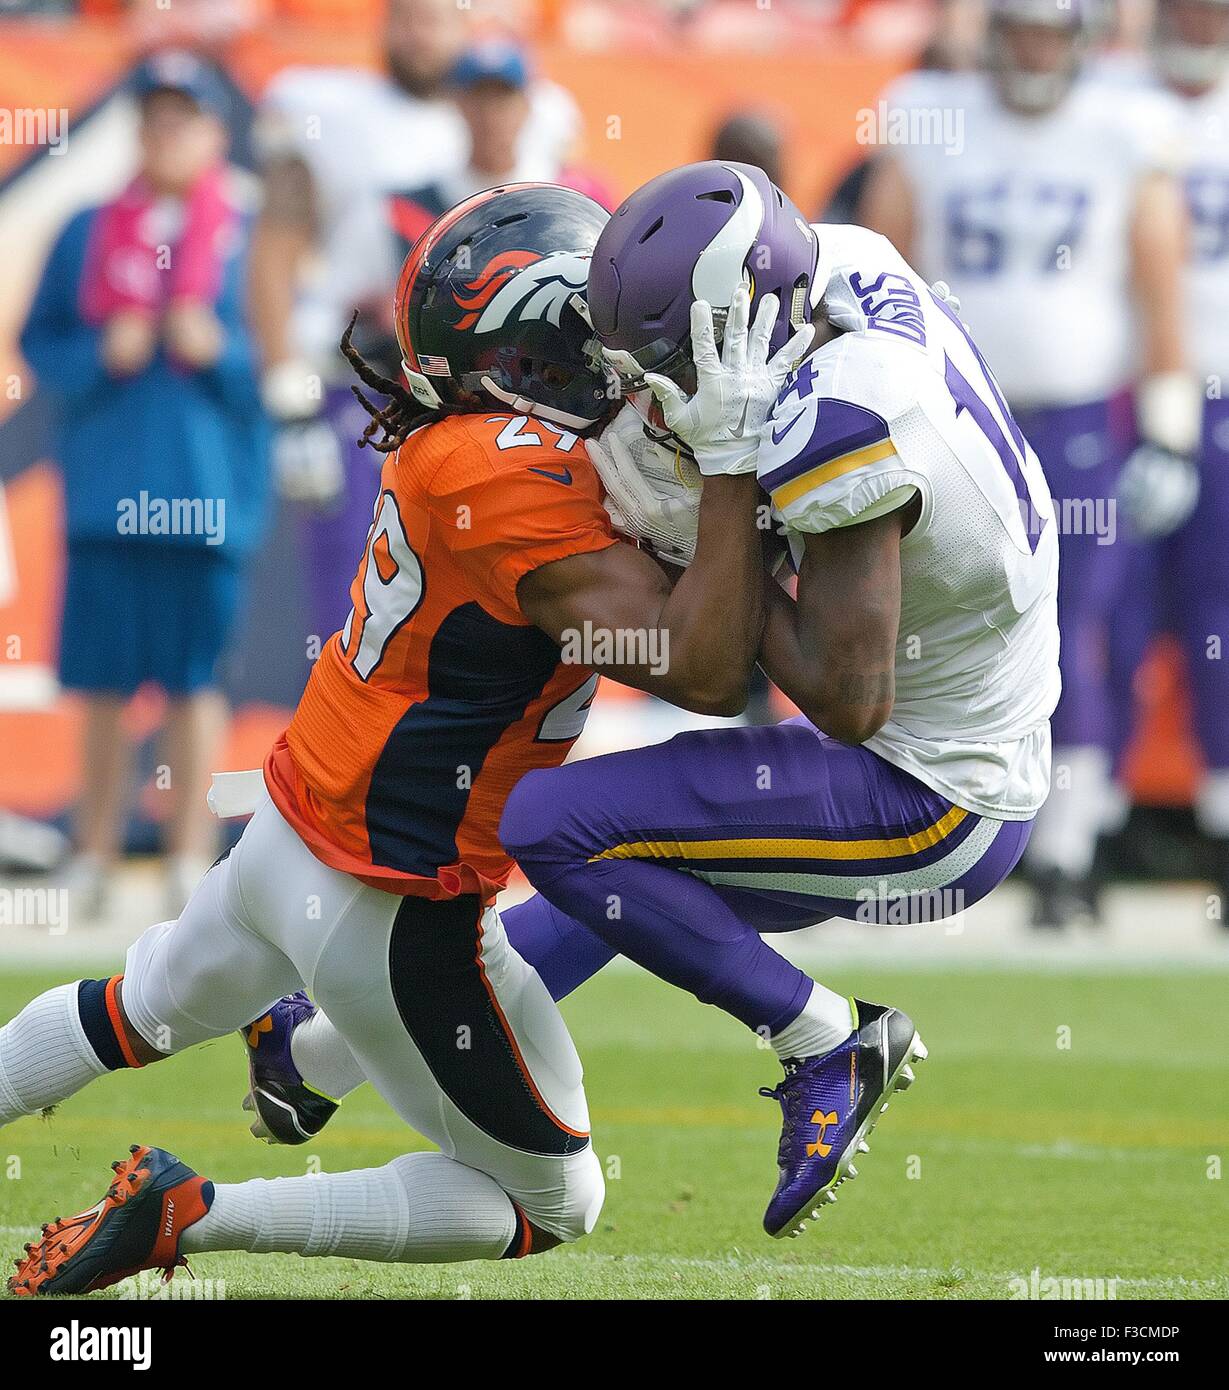 Oct. 4, 2015 - Denver, Colorado, U.S - Vikings WR STEFON DIGGS, right, gets hit head on by Broncos CB BRADLEY ROBY, left, during the 1st. half at Sports Authority Field at Mile High on Sunday afternoon. Broncos beat the Vikings 23-20. (Credit Image: © Hector Acevedo via ZUMA Wire) Stock Photo